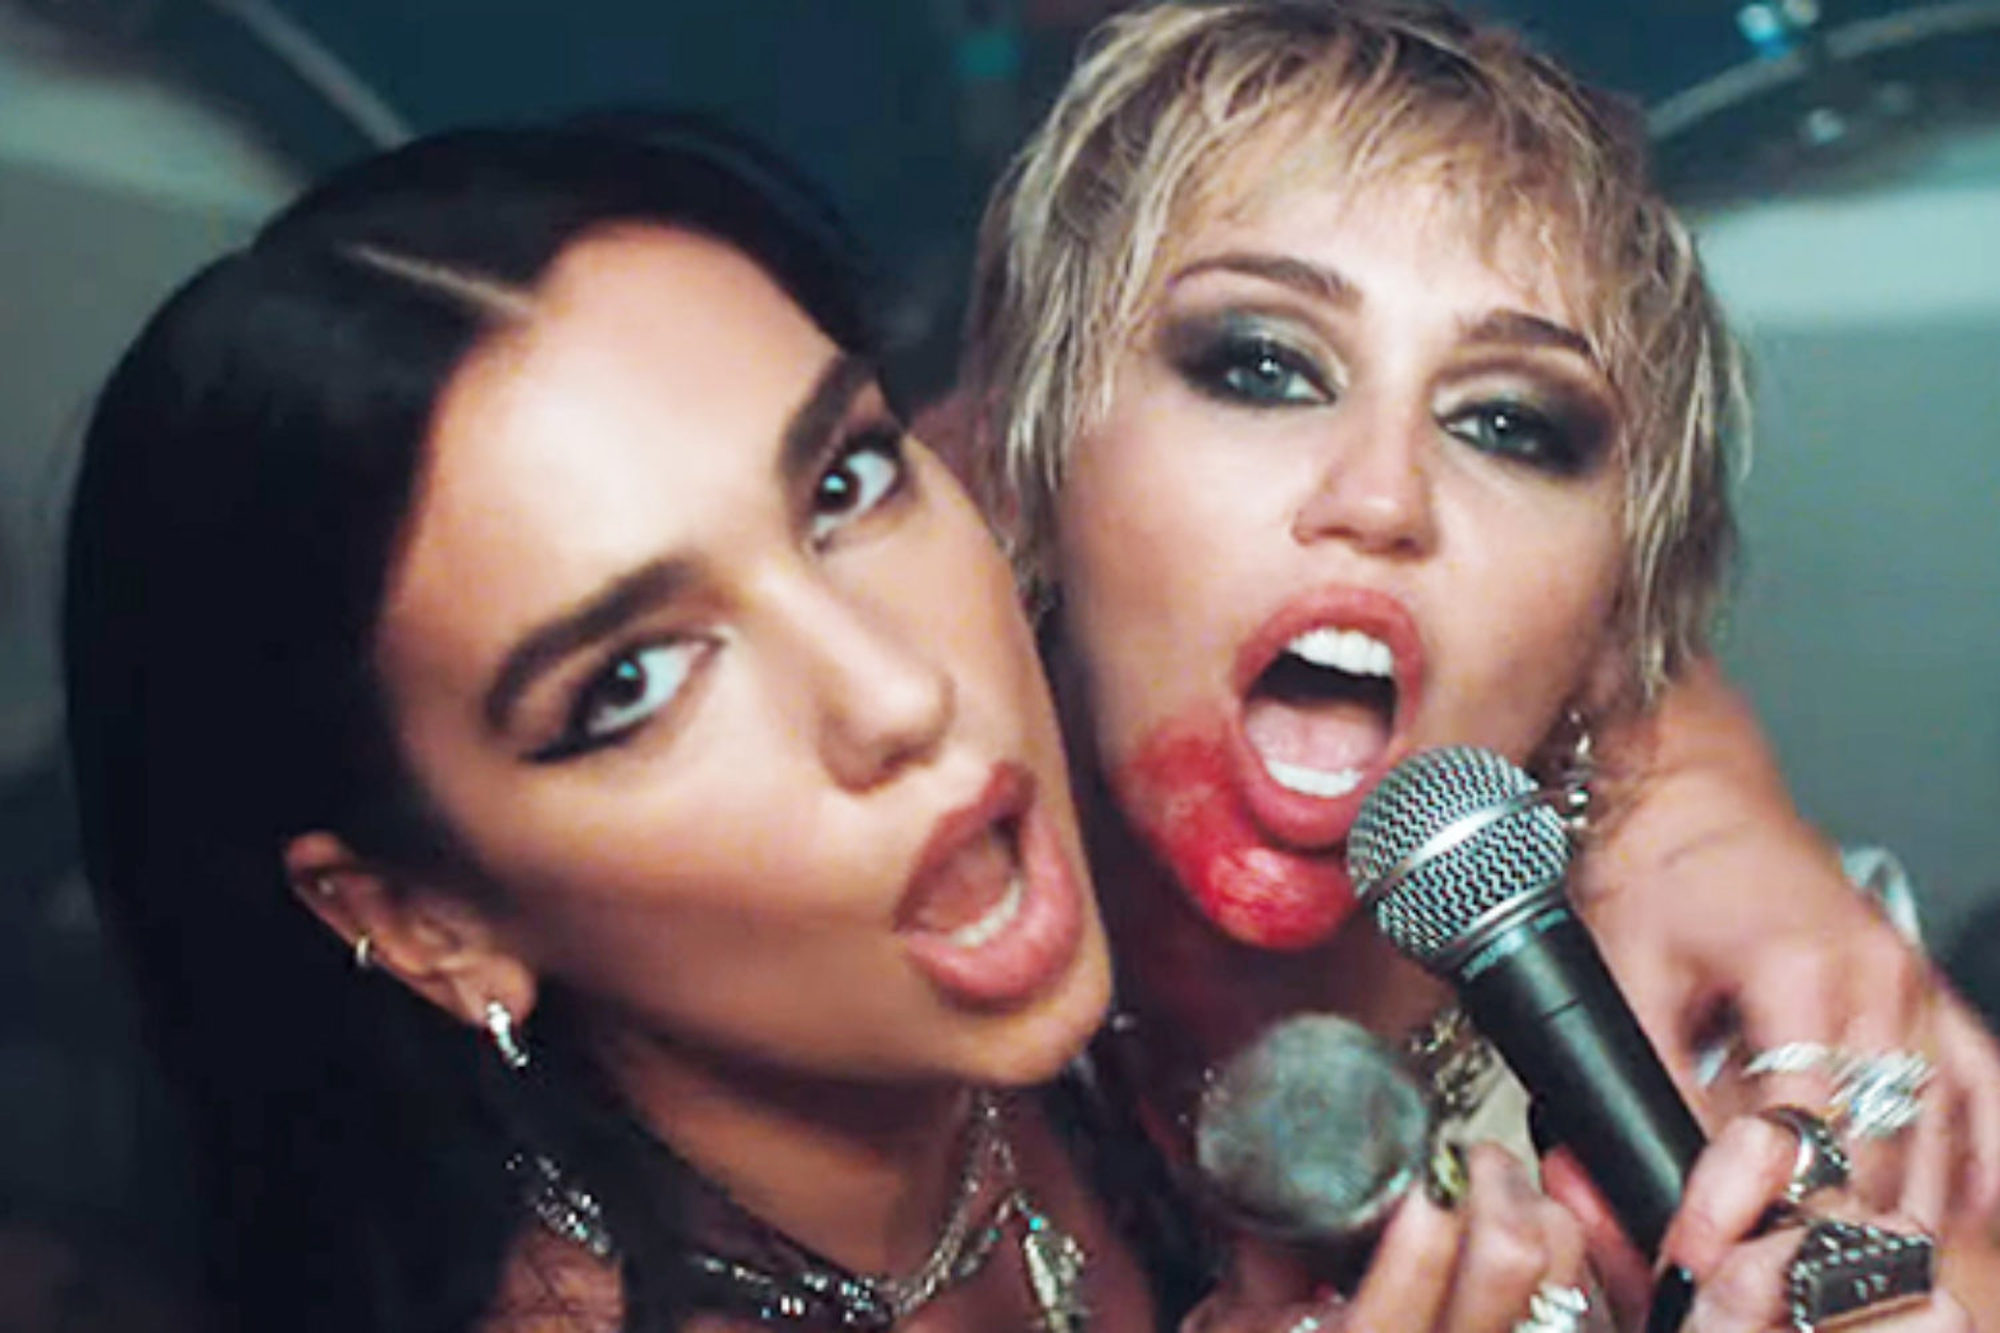 Miley Cyrus Featured Dua Lipa in Her Music Video for Prisoner